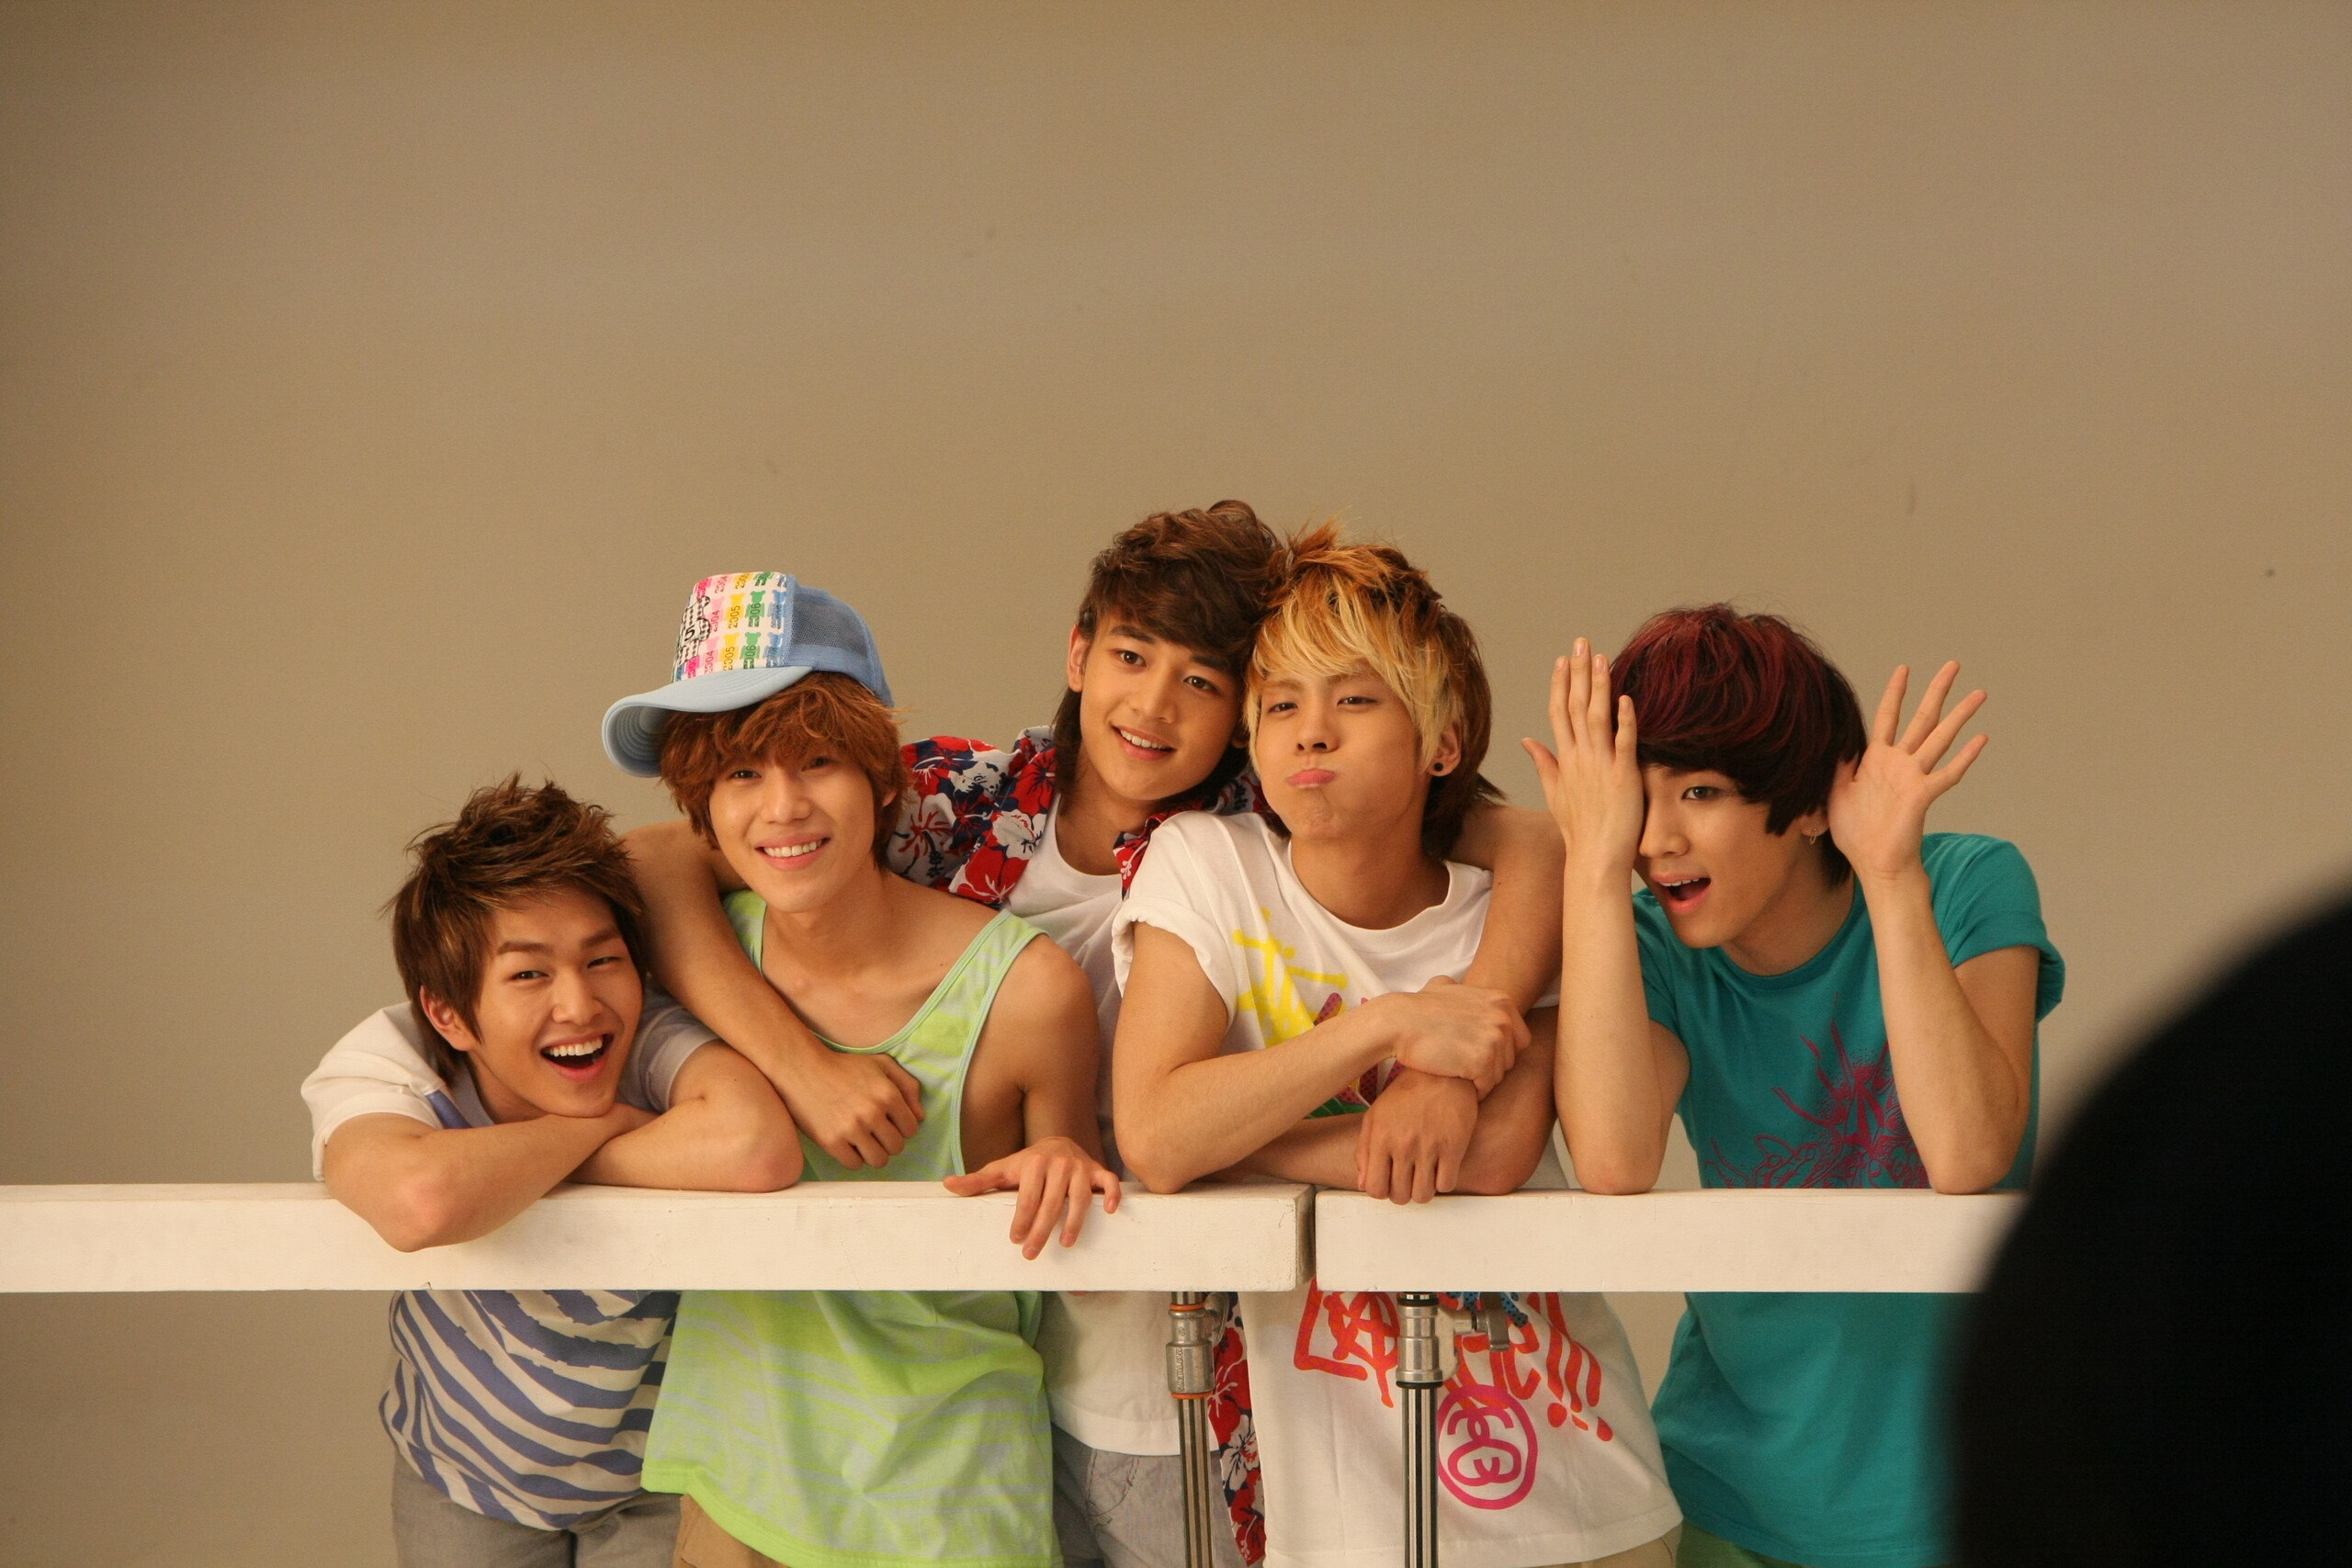 SHINee: The band debuted in May 2008 with their first EP, Replay. 2560x1710 HD Wallpaper.